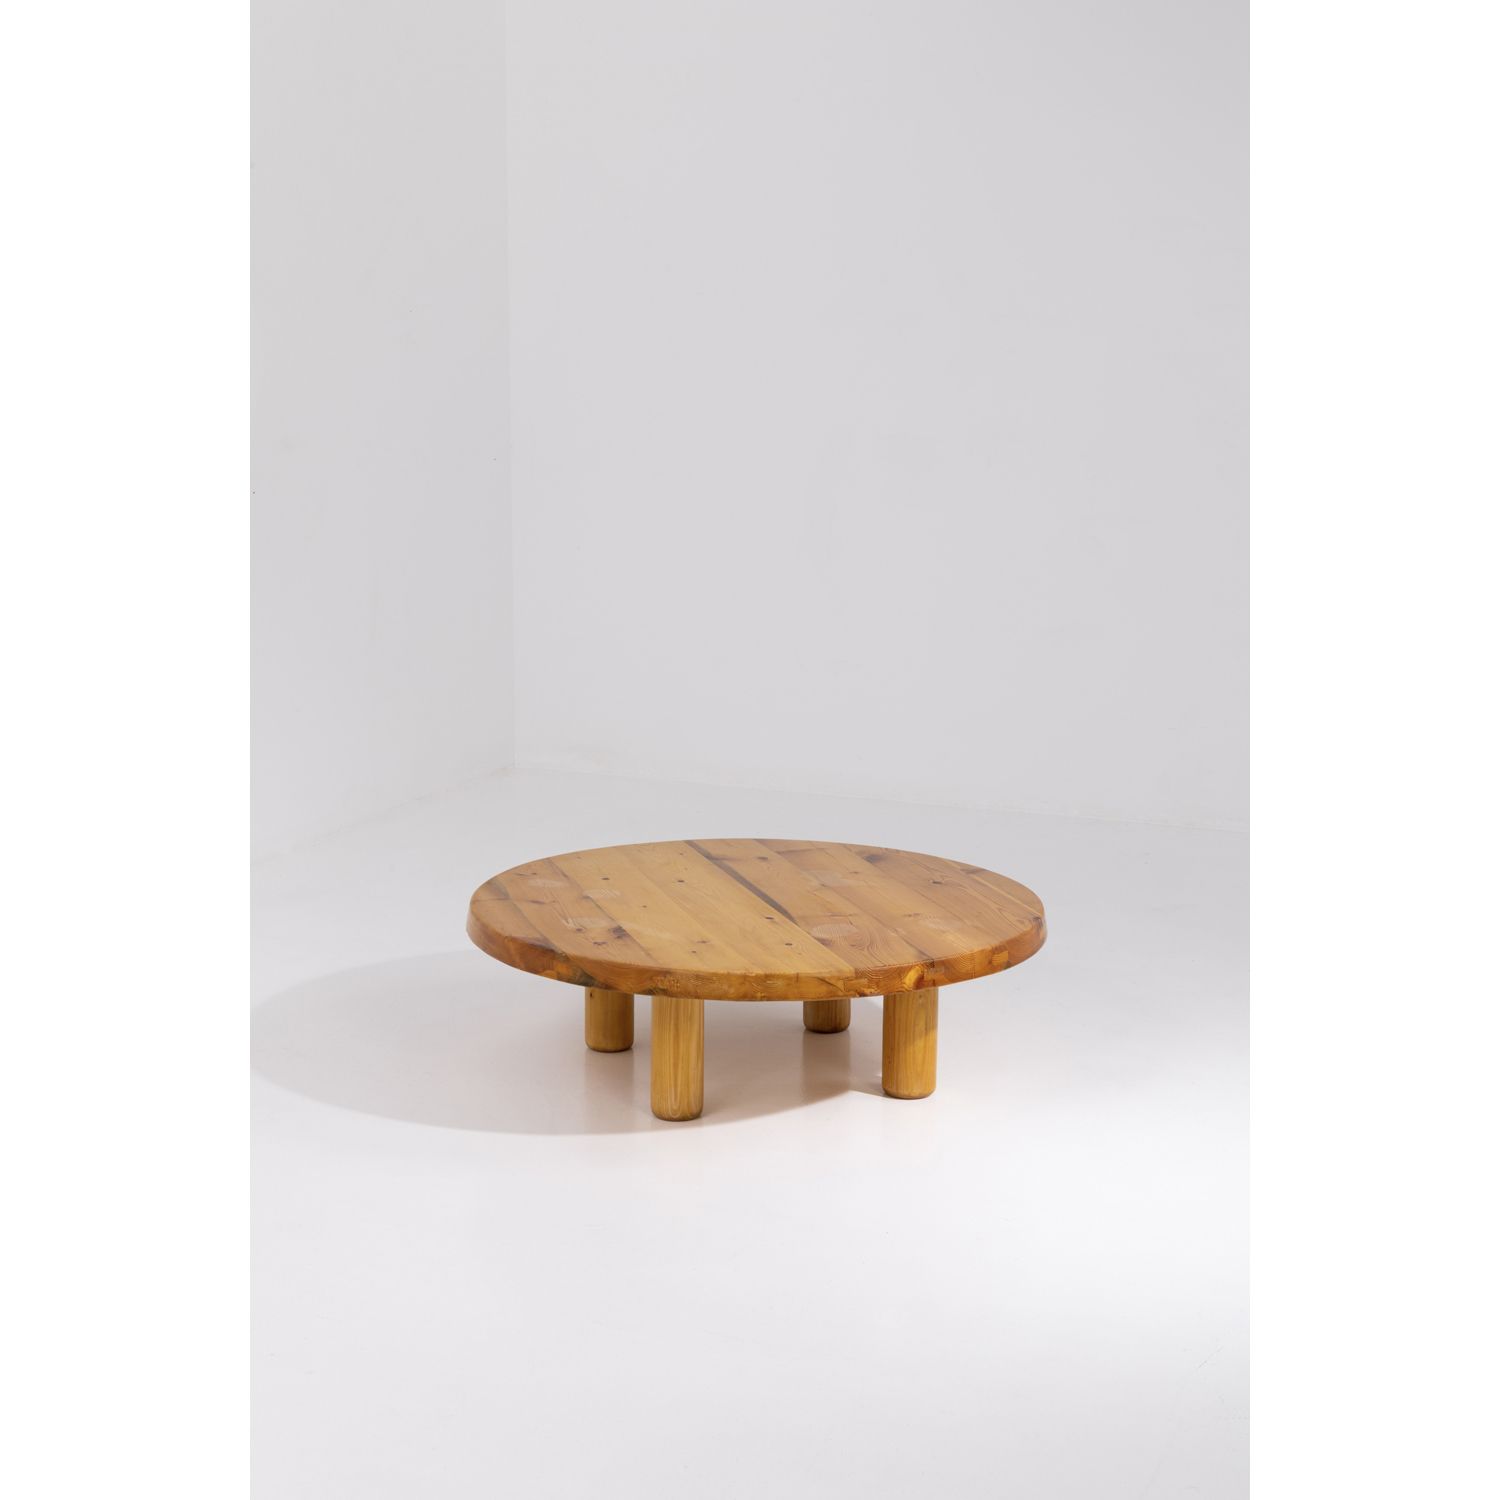 Charlotte Perriand (1903-1999) Table basse Charlotte Perriand (1903-1999)

Table&hellip;